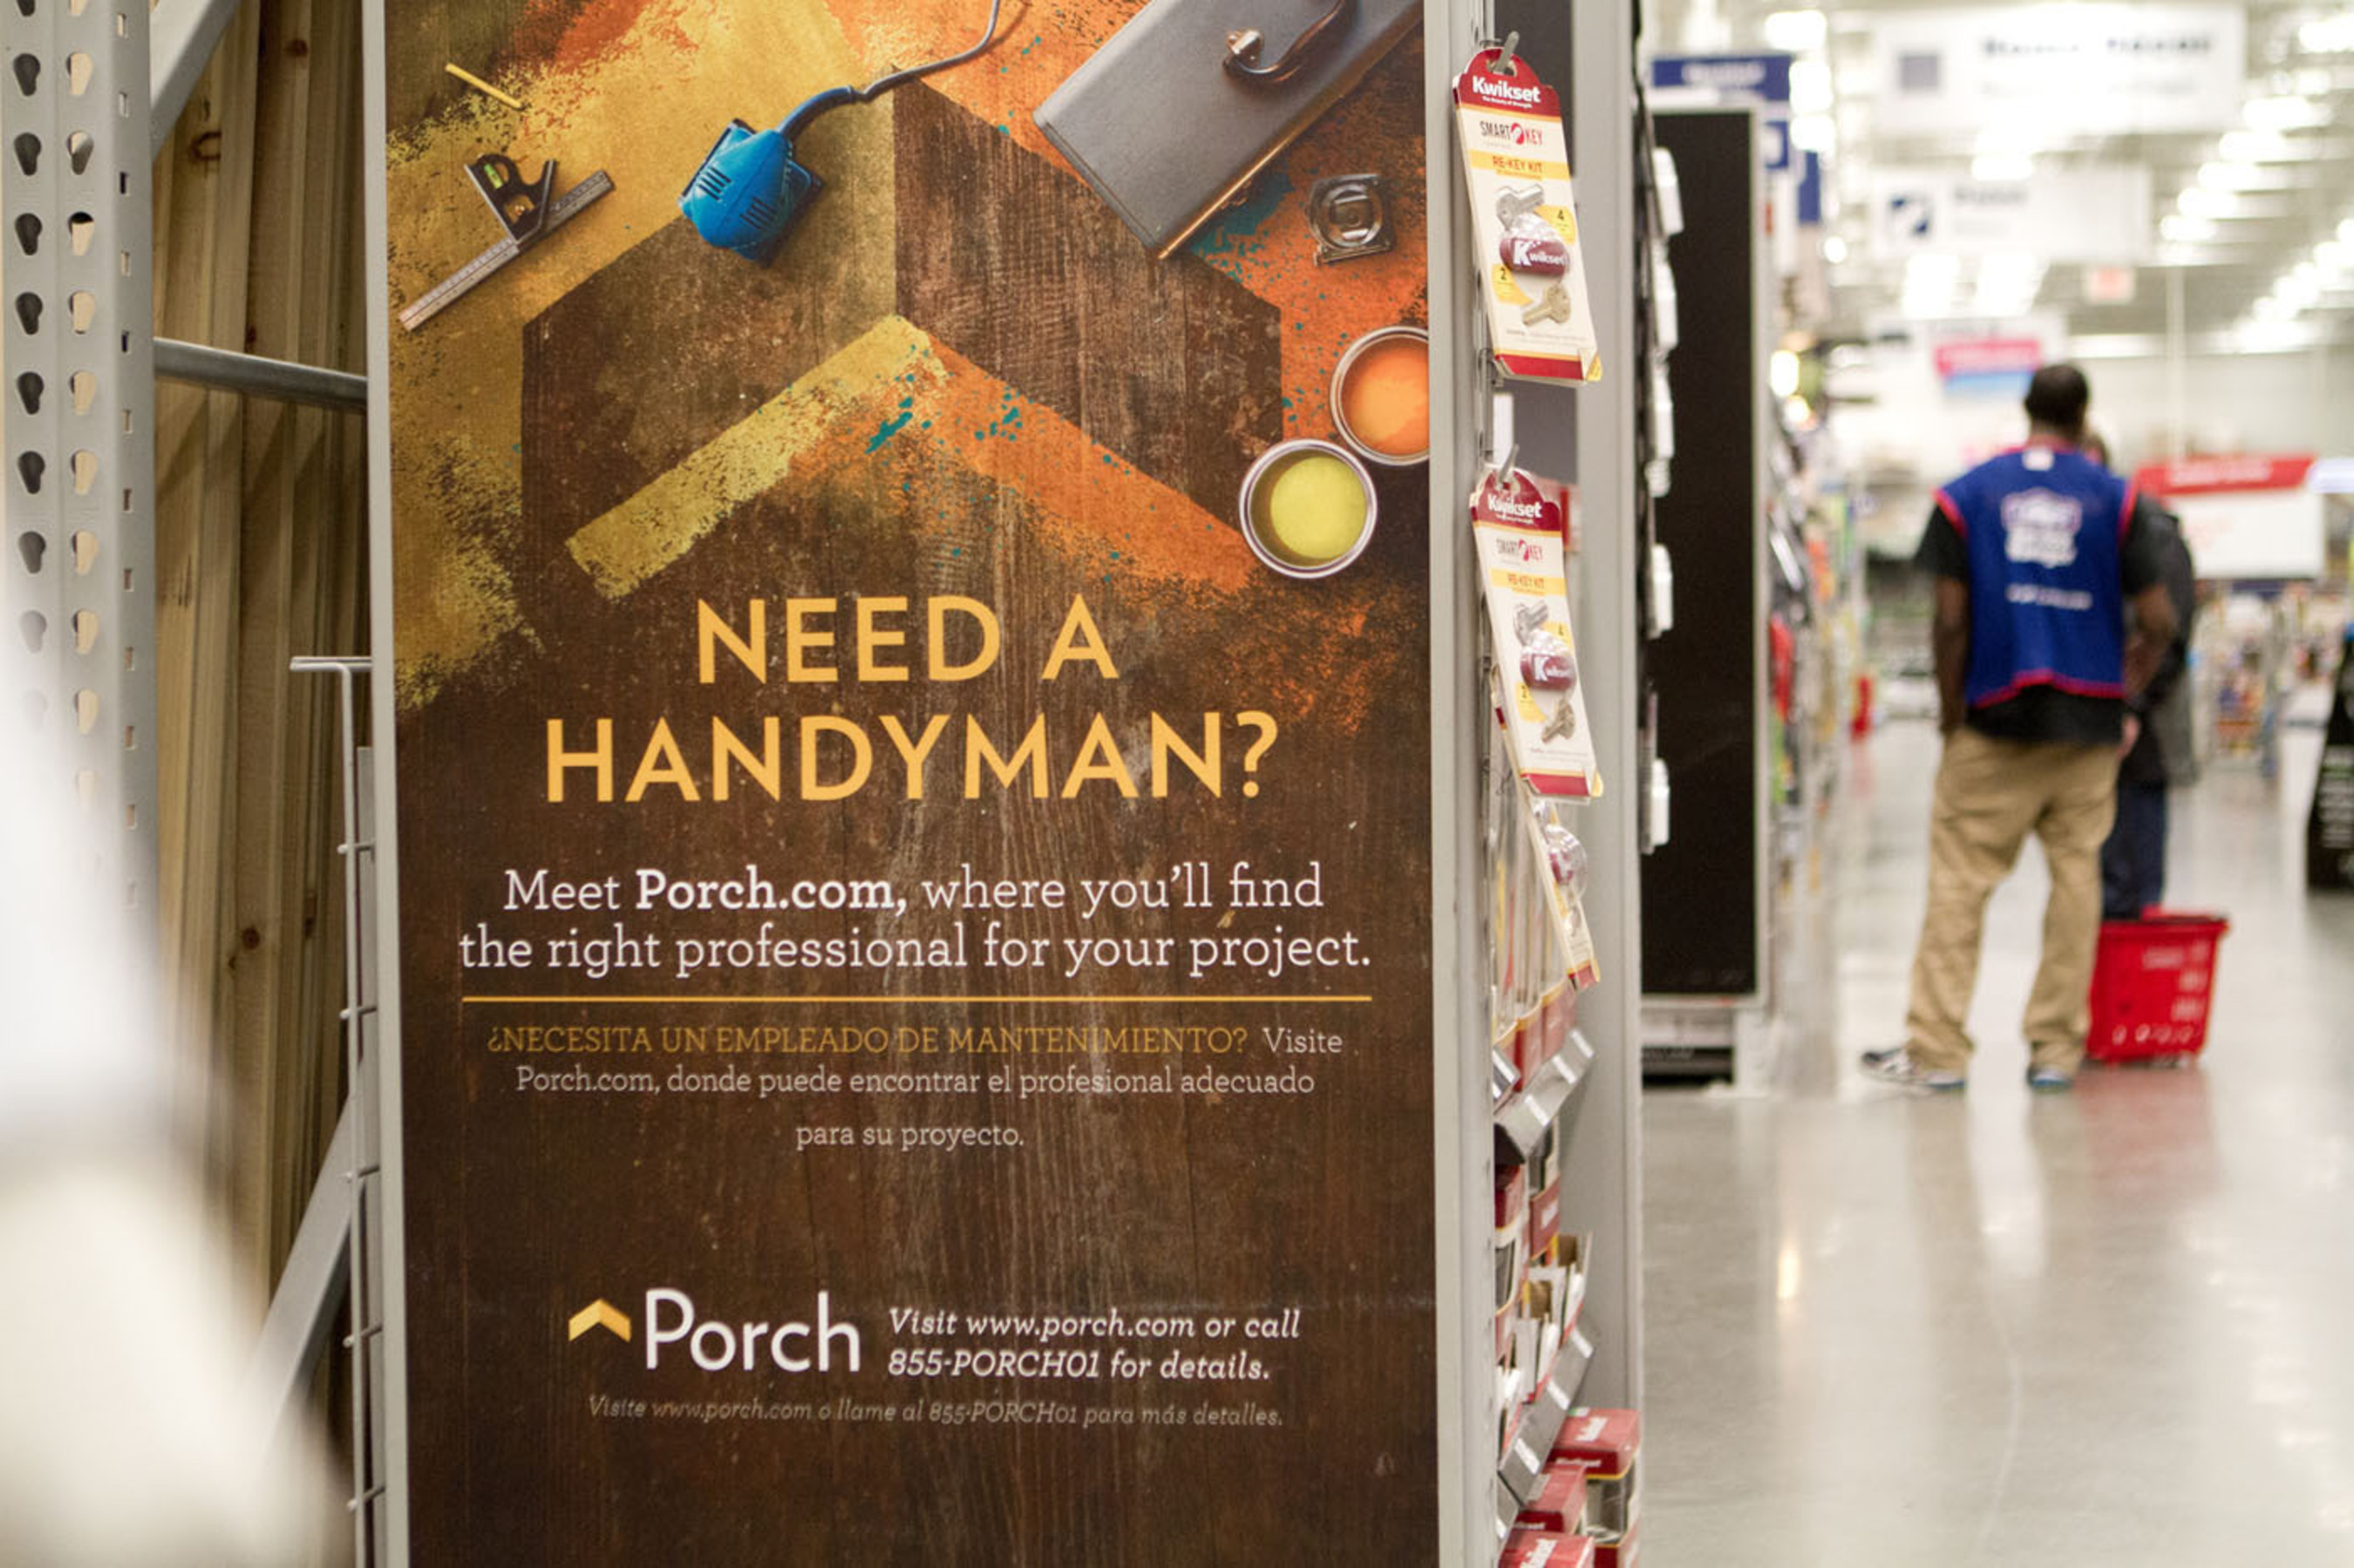 Porch will serve as a resource for Lowe's employees to help customers connect directly with the right pros to provide services Lowe's does not currently offer through its installation program, such as handymen, painters and landscapers. (PRNewsFoto/LOWE'S)